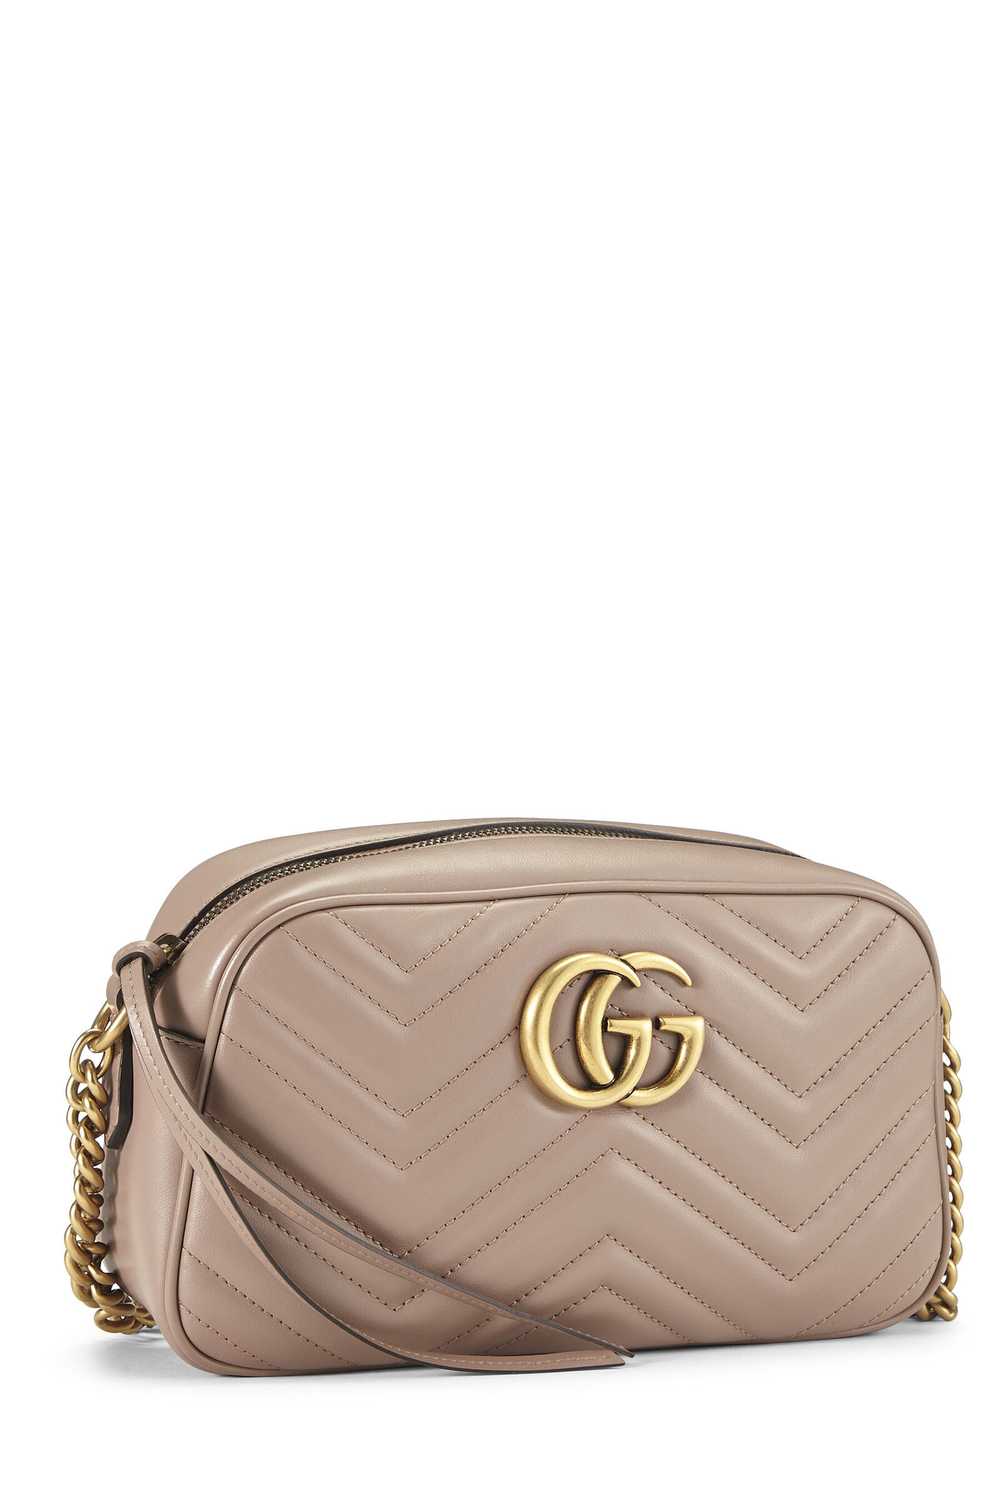 Pink Leather GG Marmont Crossbody - image 2